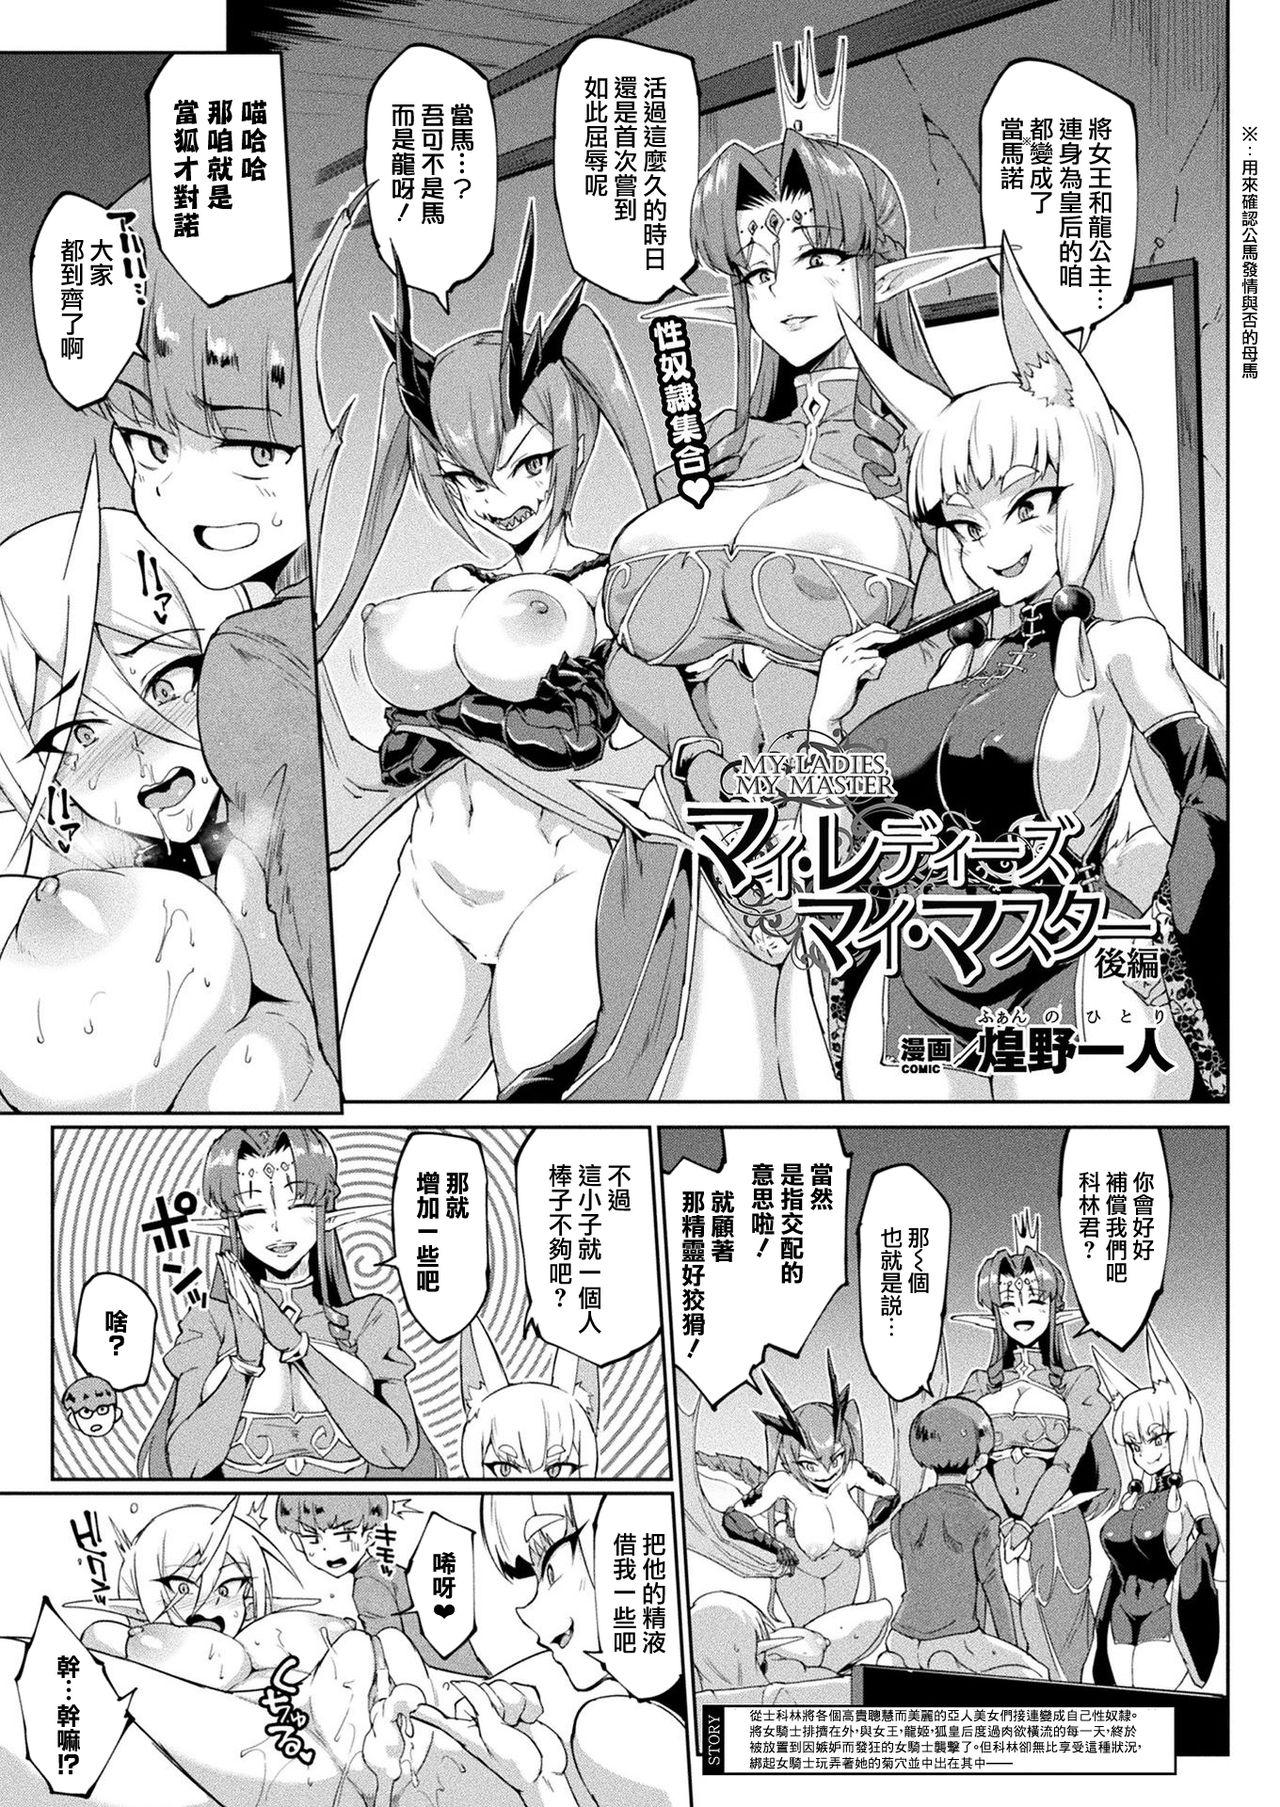 Butts MY LADIES, MY MASTER Kouhen Amature Sex - Page 2